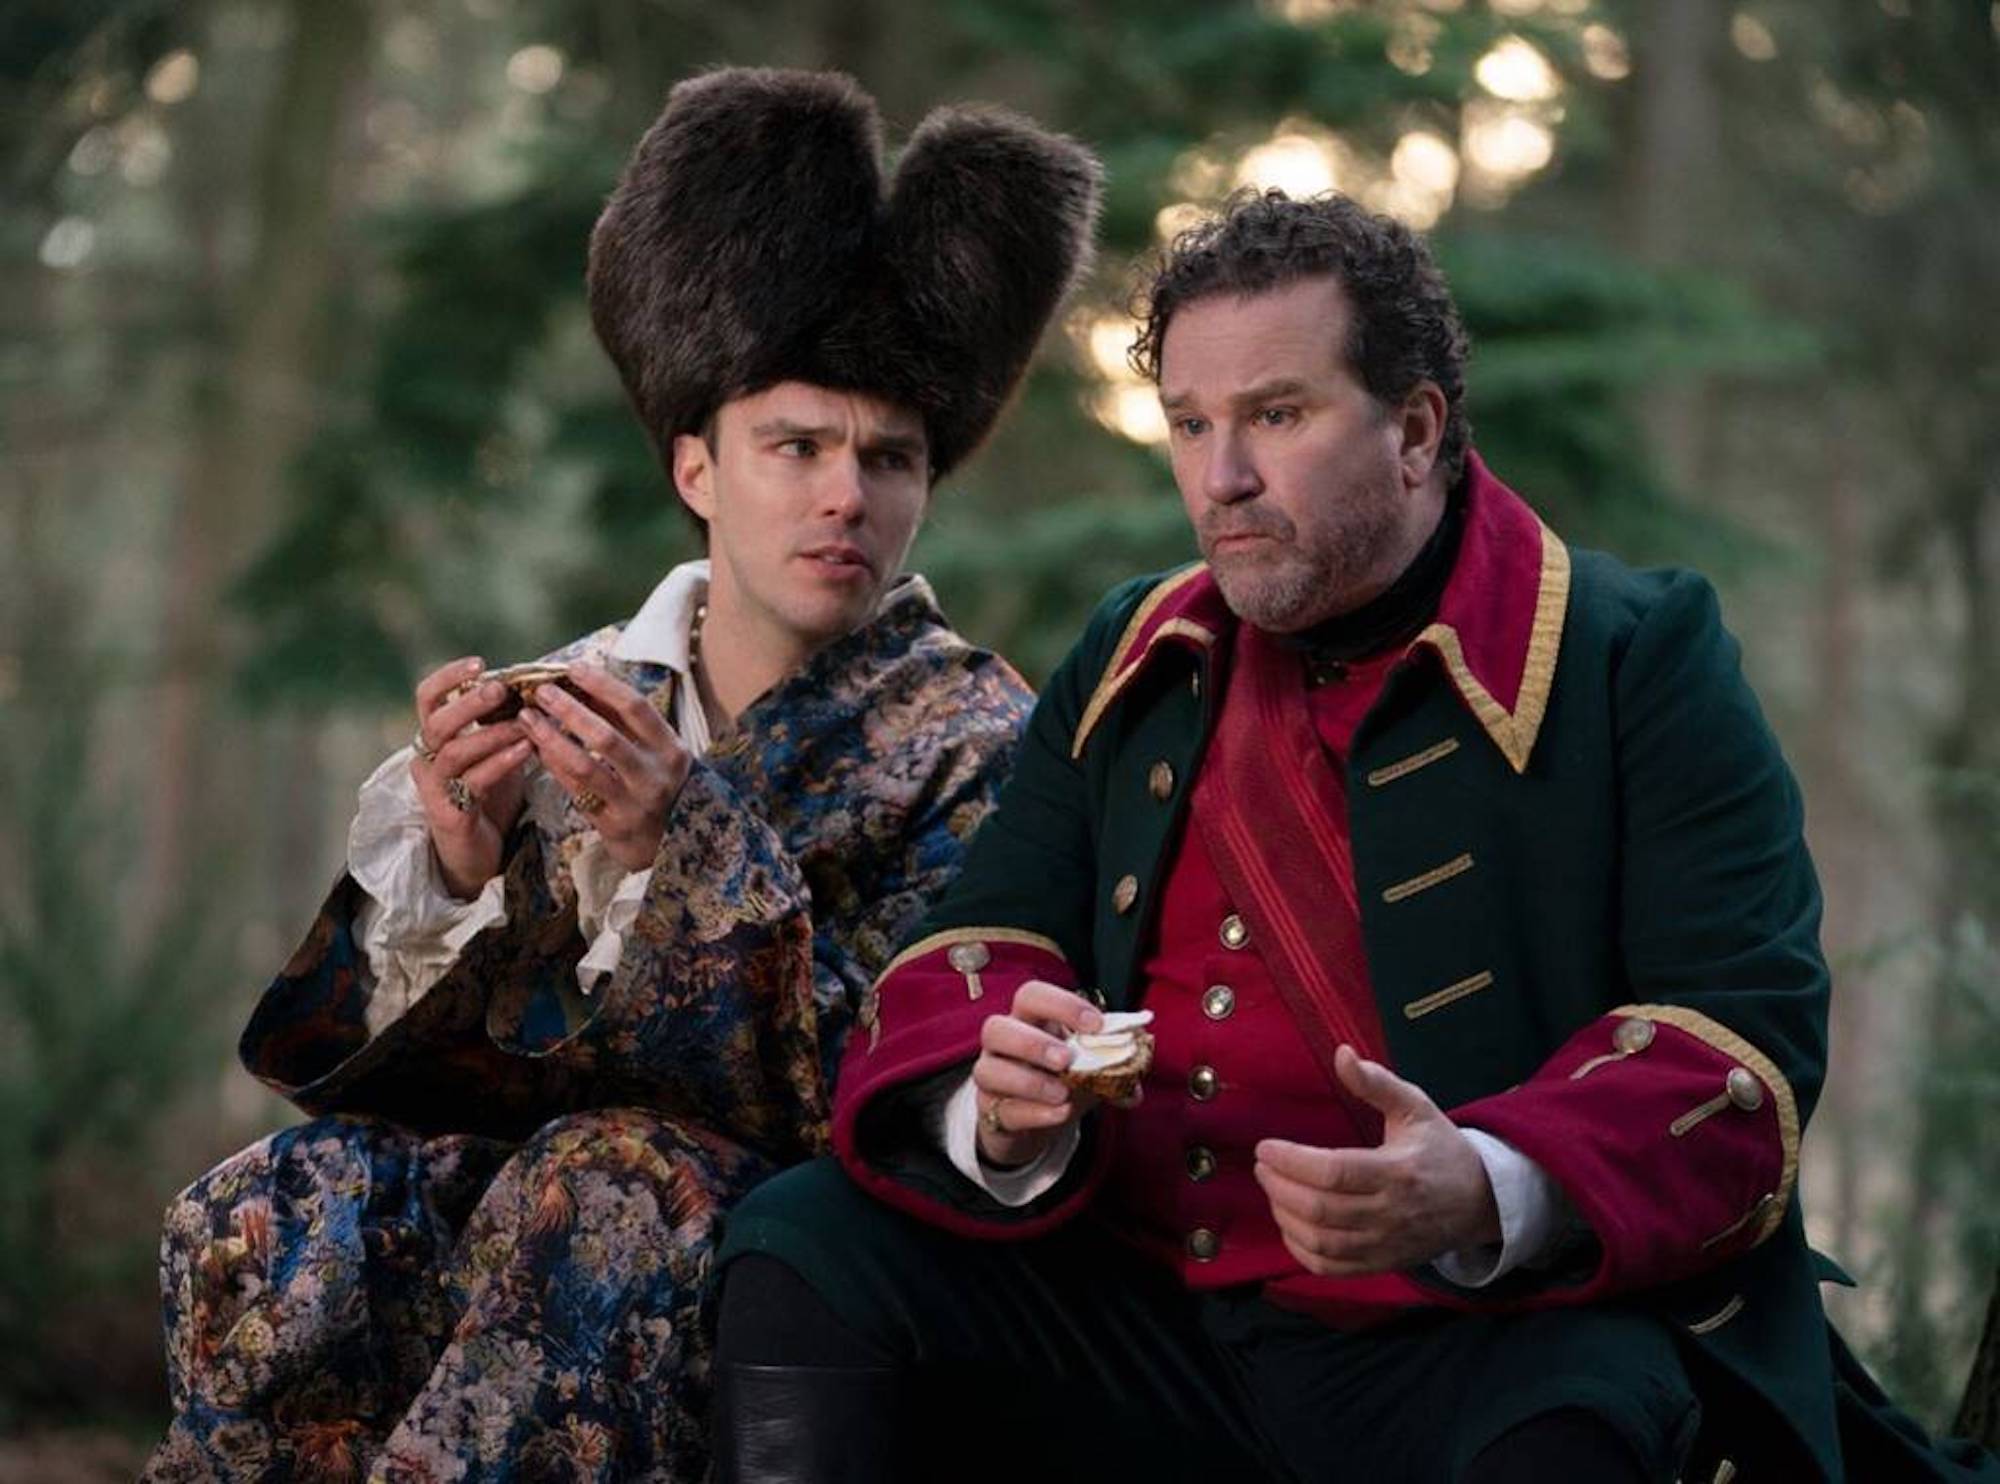 The characters Peter (played by Nicholas Hoult), dressed in a tall fur hat and brocaded coat, and General Velementov (Douglas Hodge), in an 18th century military uniform, sit in the woods eating cheese on bread.